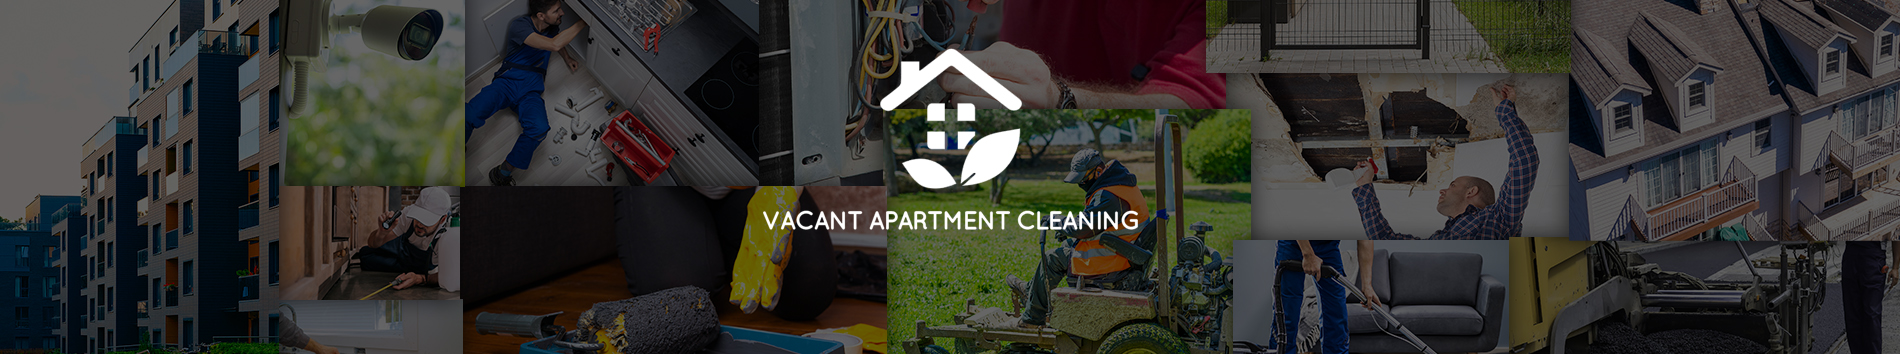 Vacant Apartment Cleaning